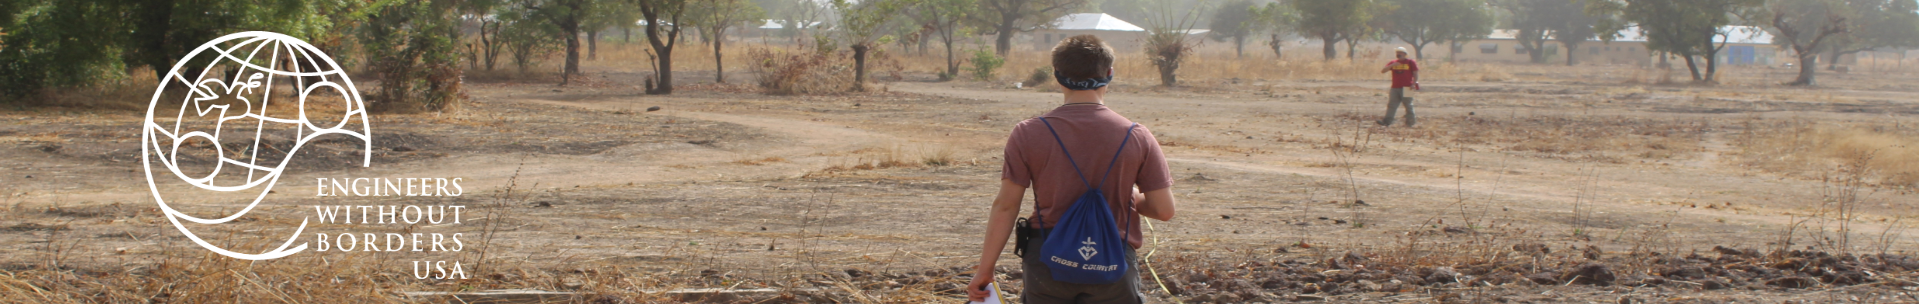 Engineers Without Borders Header